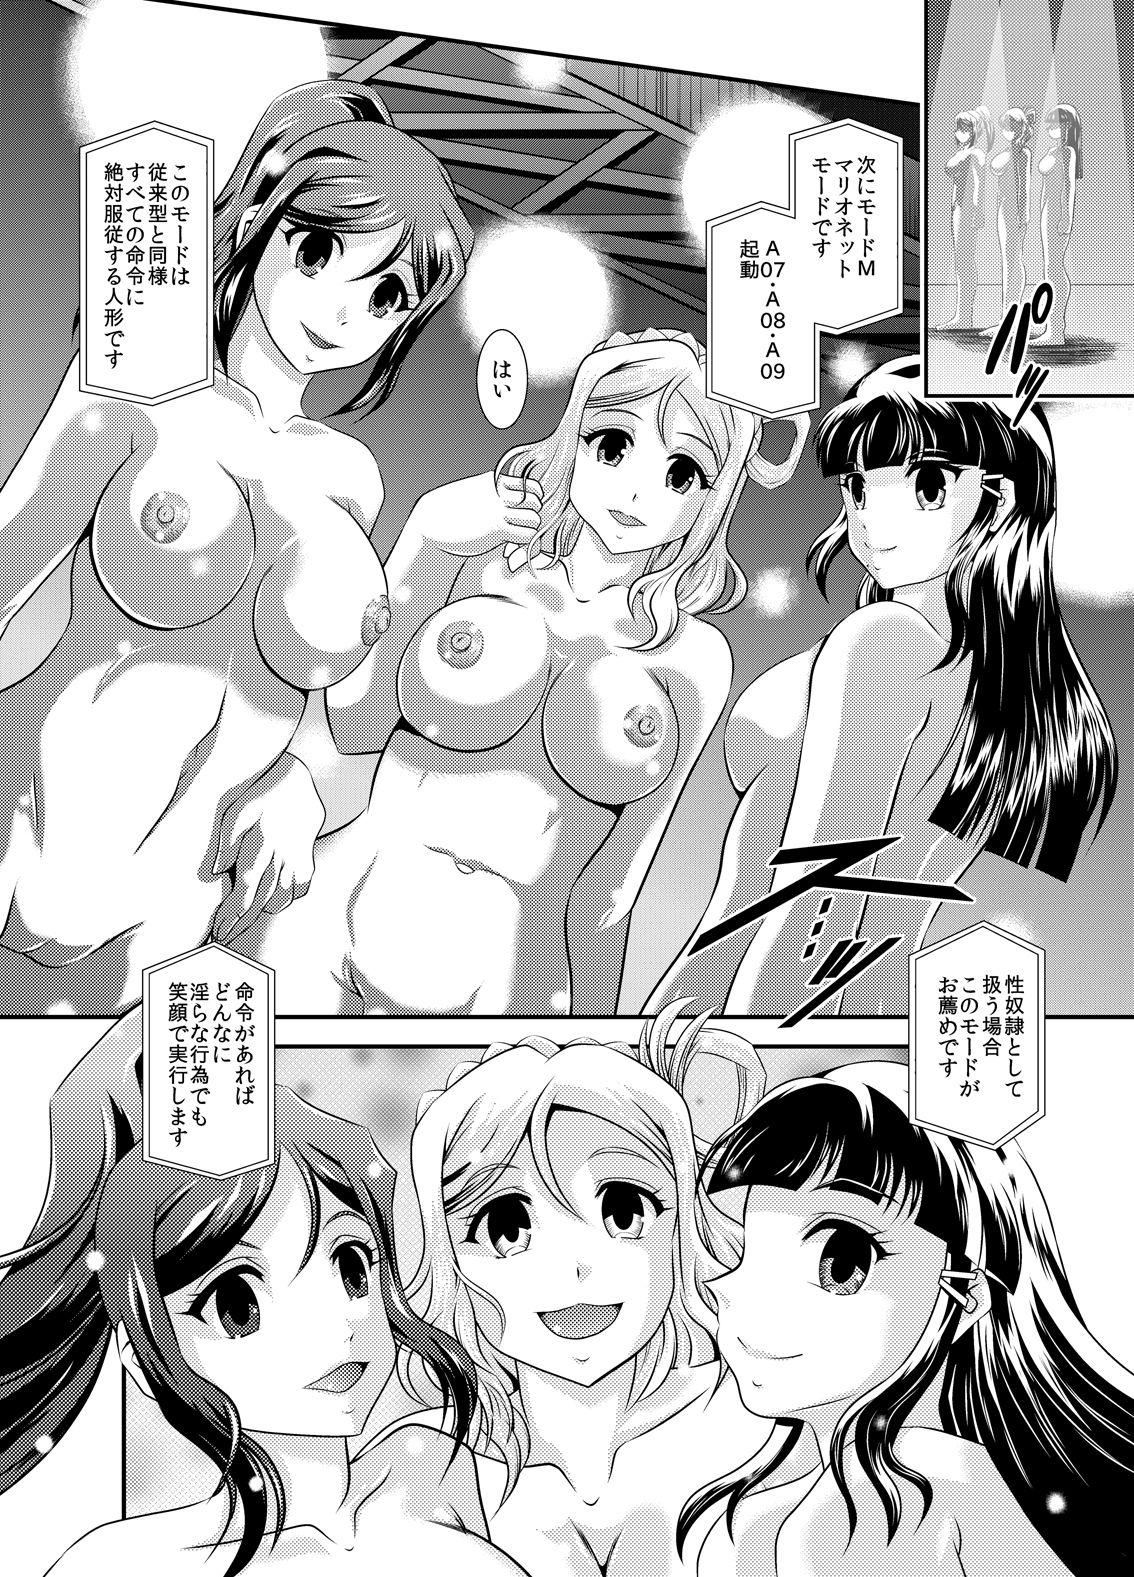 Perra ProjectAqours EP04:HOPELESS - Love live sunshine Soft - Page 8